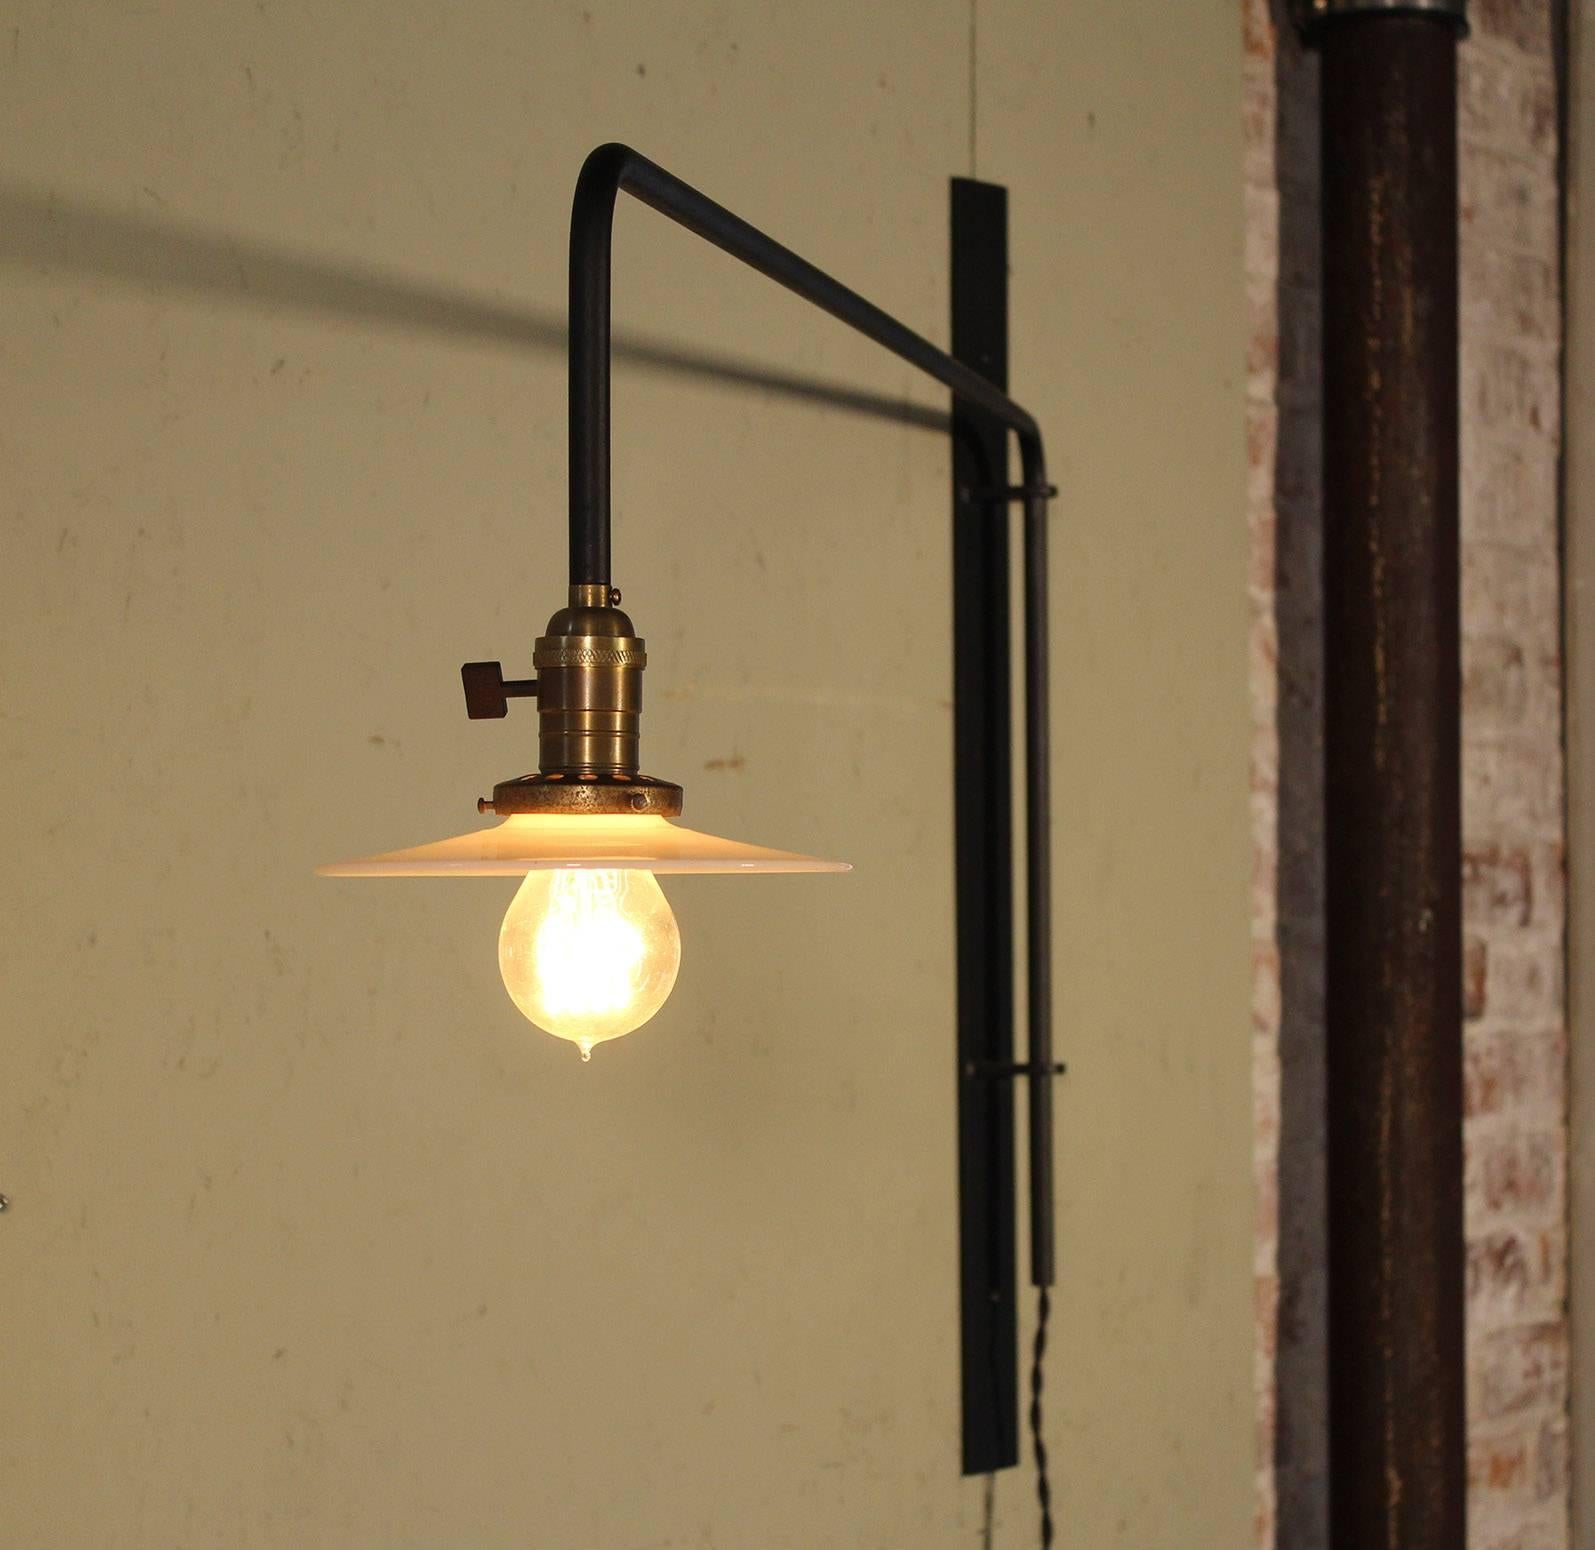 Mid-Century Modern Wall Sconce Lamp Light Swing Out Steel Milk Glass Shade with Edison Bulb